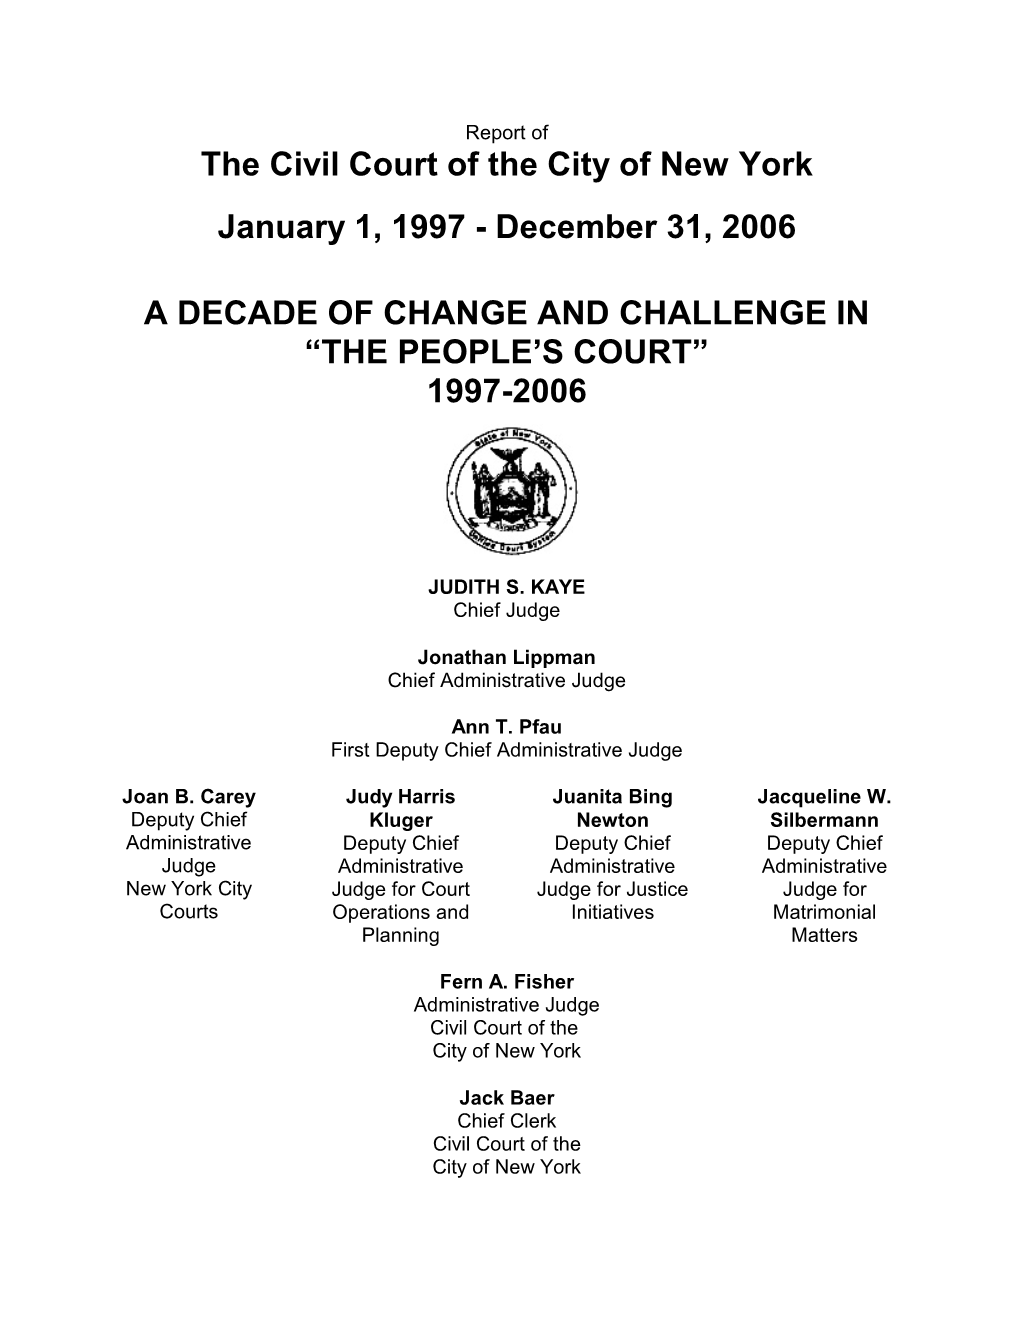 Civil Court of the City of New York 1997